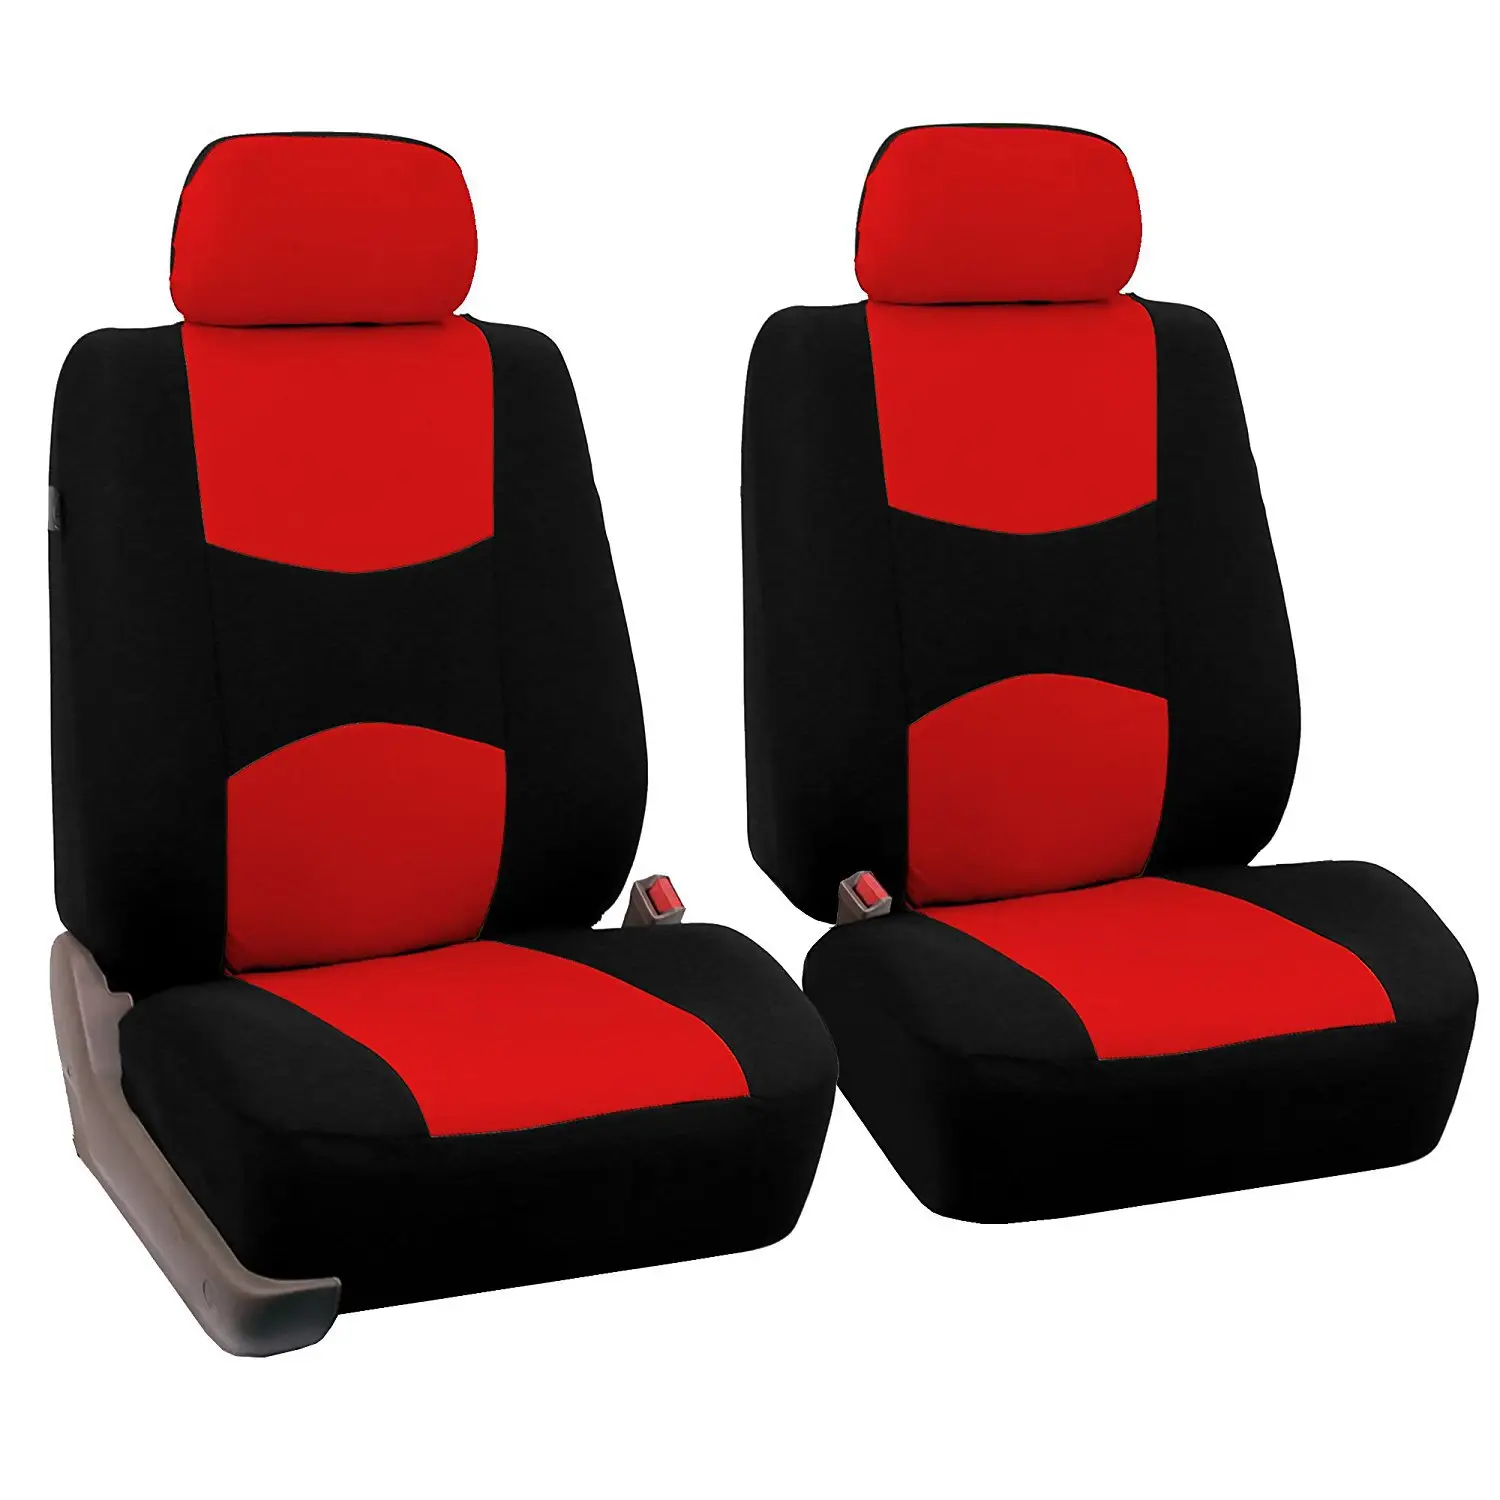 Flat Cloth Seat Covers Universal Fit for Cars Trucks  SUVs Trucks Two Front Car Seat Covers